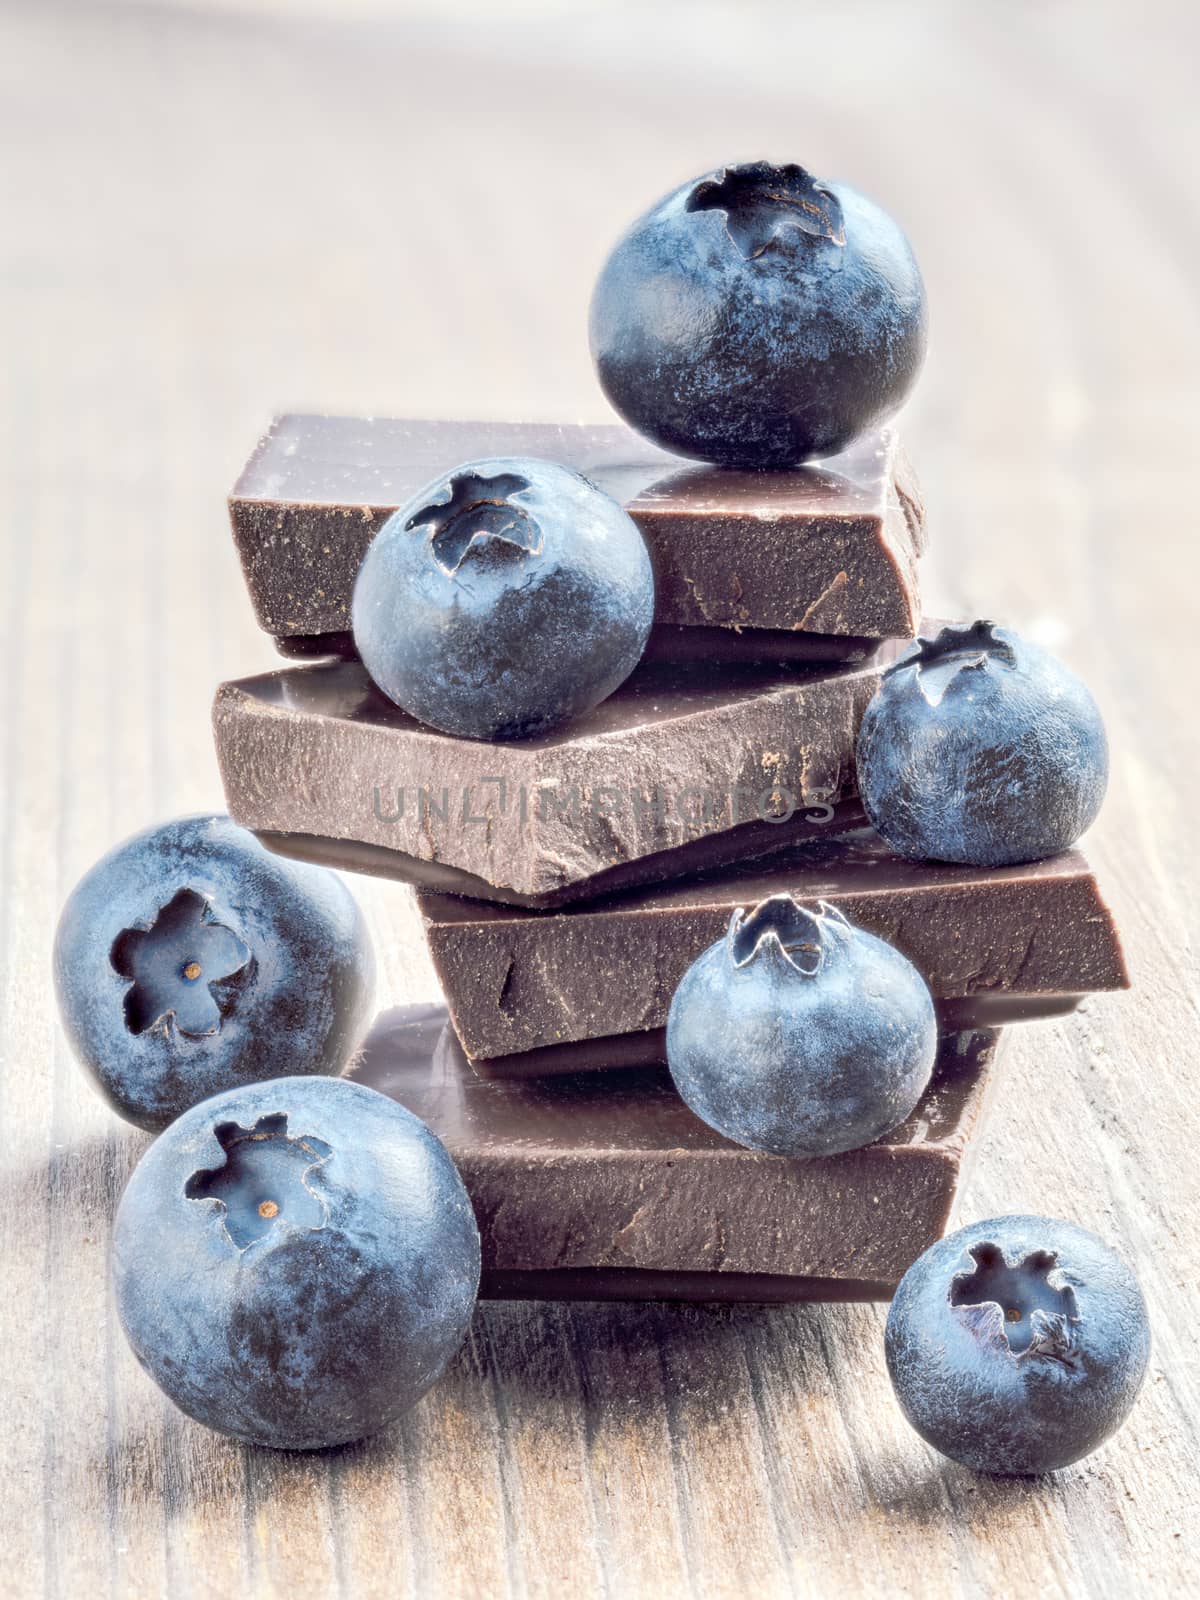 Stack of dark chocolate and fresh ripe blueberries. Blueberry and chocolate on wooden background. Vertical.